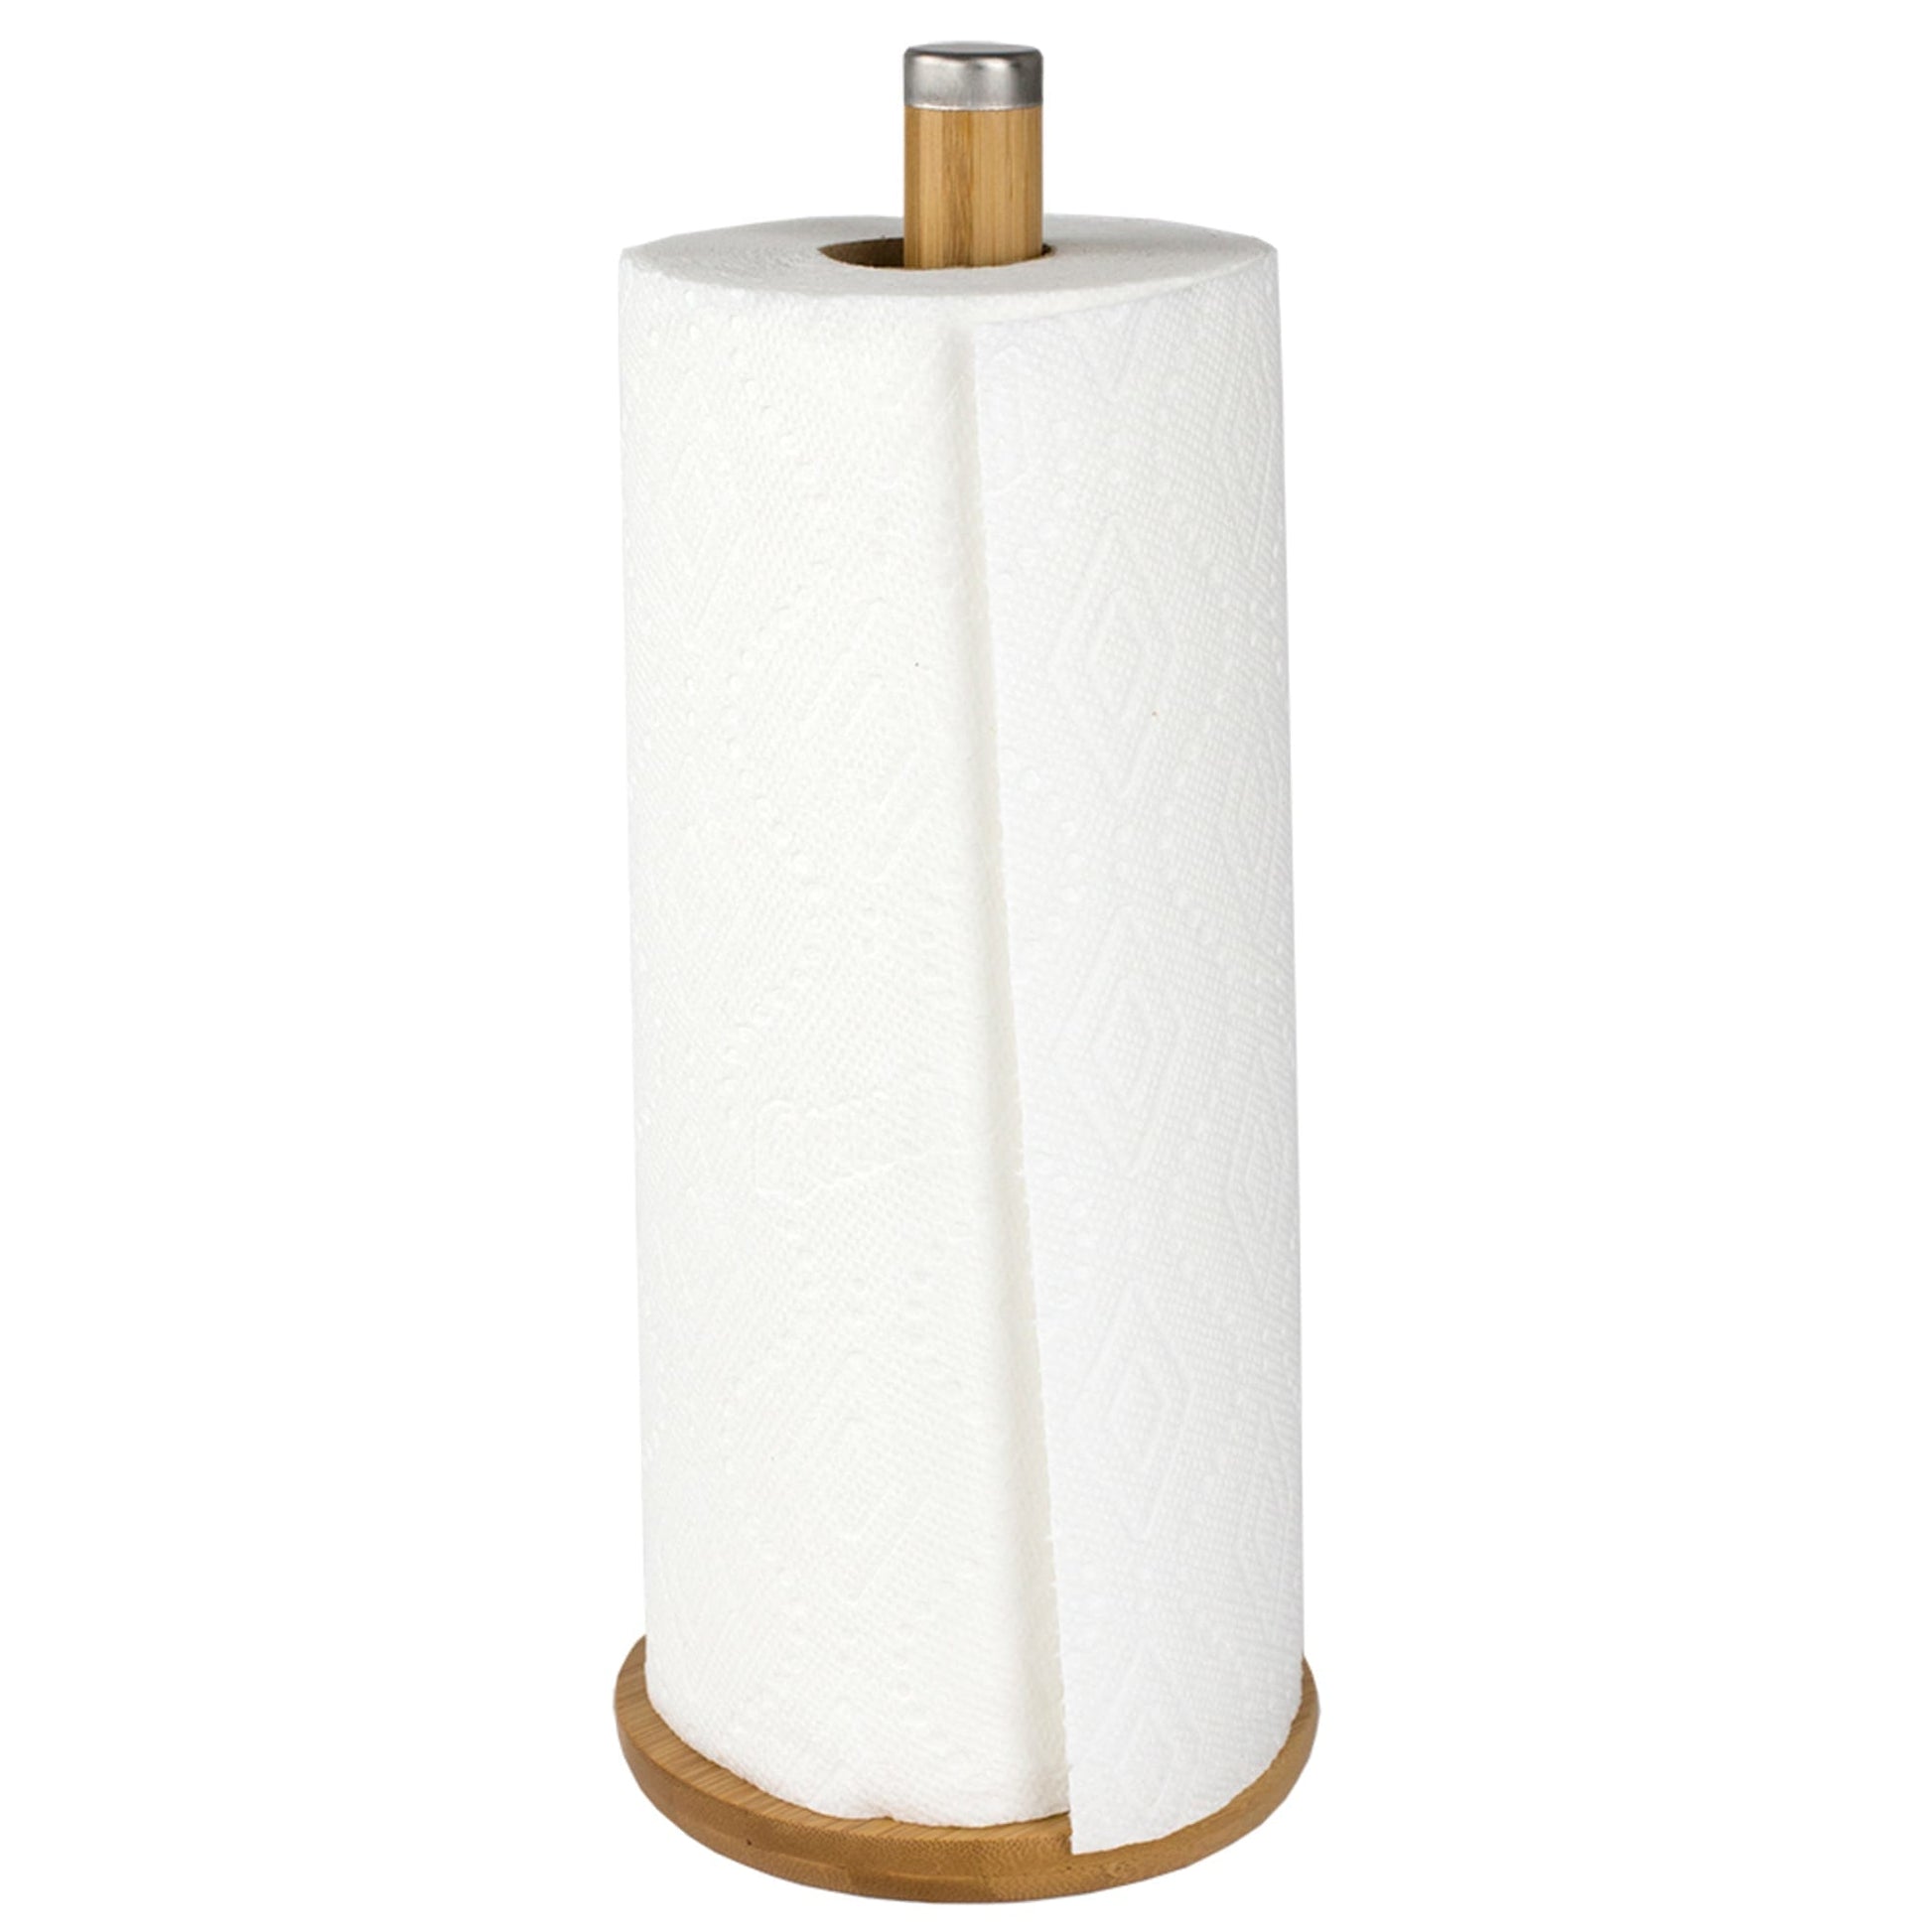 Michael Graves Design Freestanding Bamboo Paper Towel Holder with